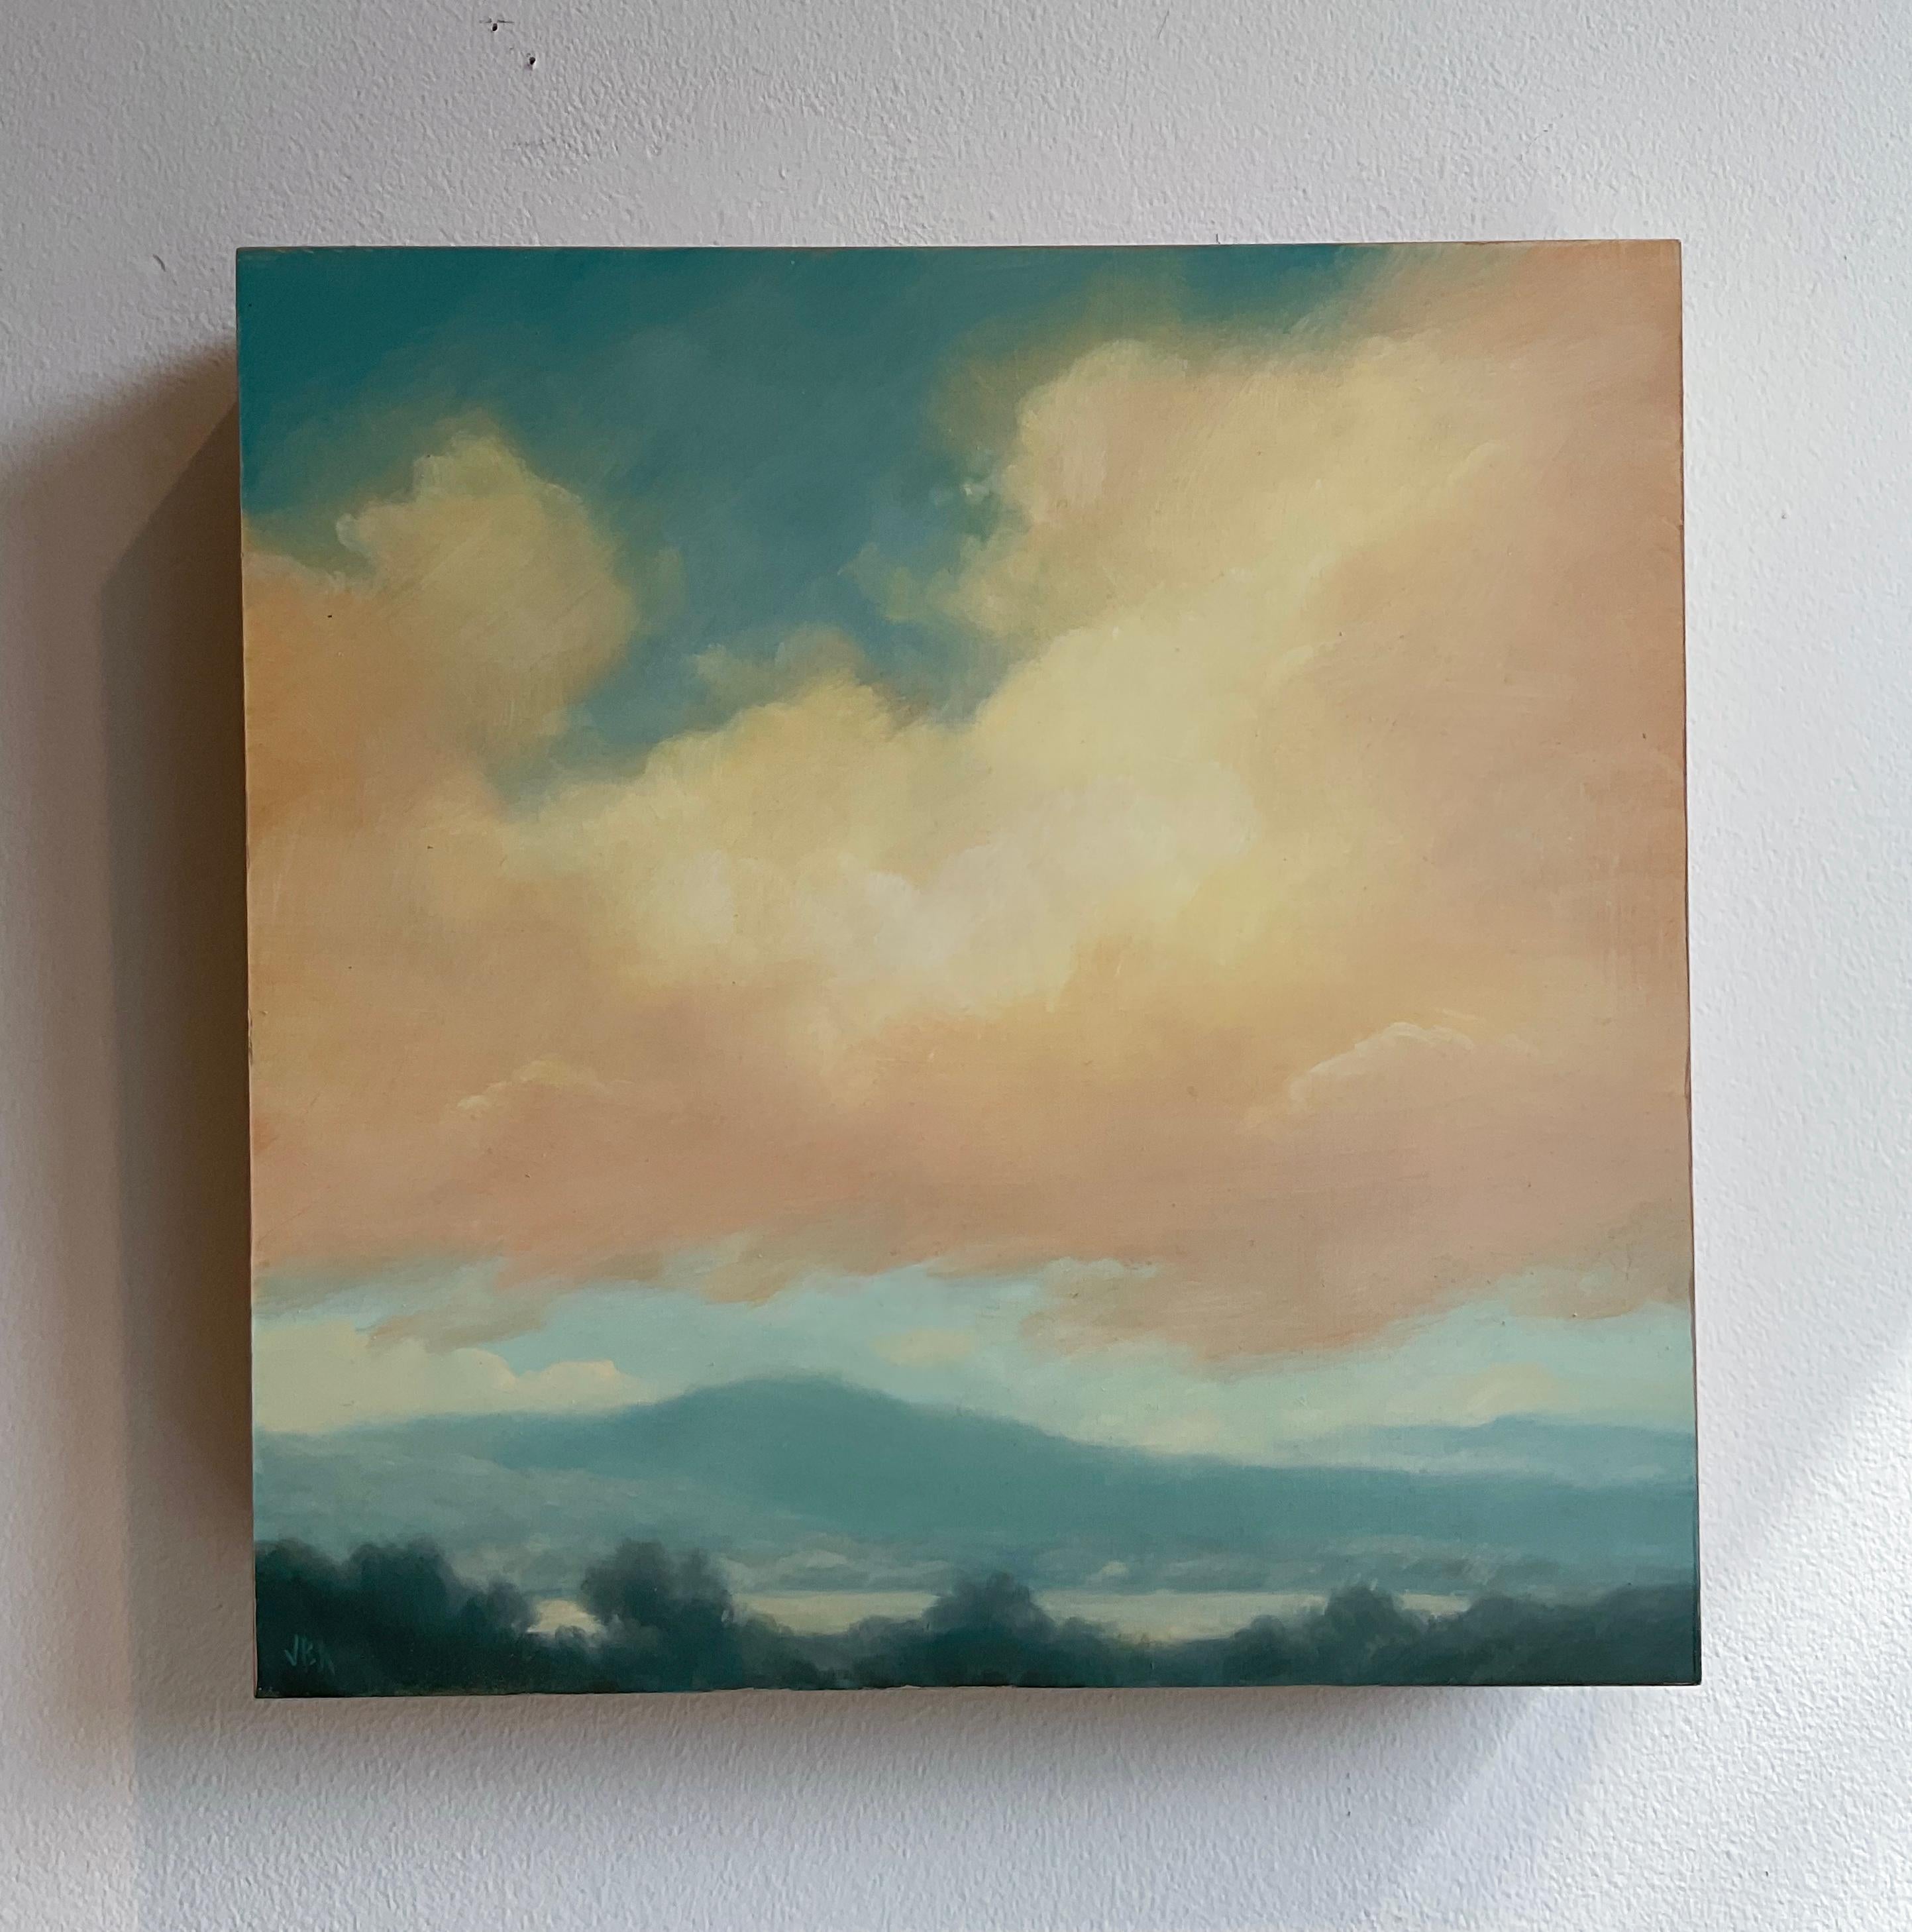 Catskills Spring No. 3 by Jane Bloodgood-Abrams
Contemporary, Hudson River School style landscape painting on panel of a clouds floating over the mountains 
Square landscape painting, 12 x 12 x 2 inches inches unframed

Artist's signature is located